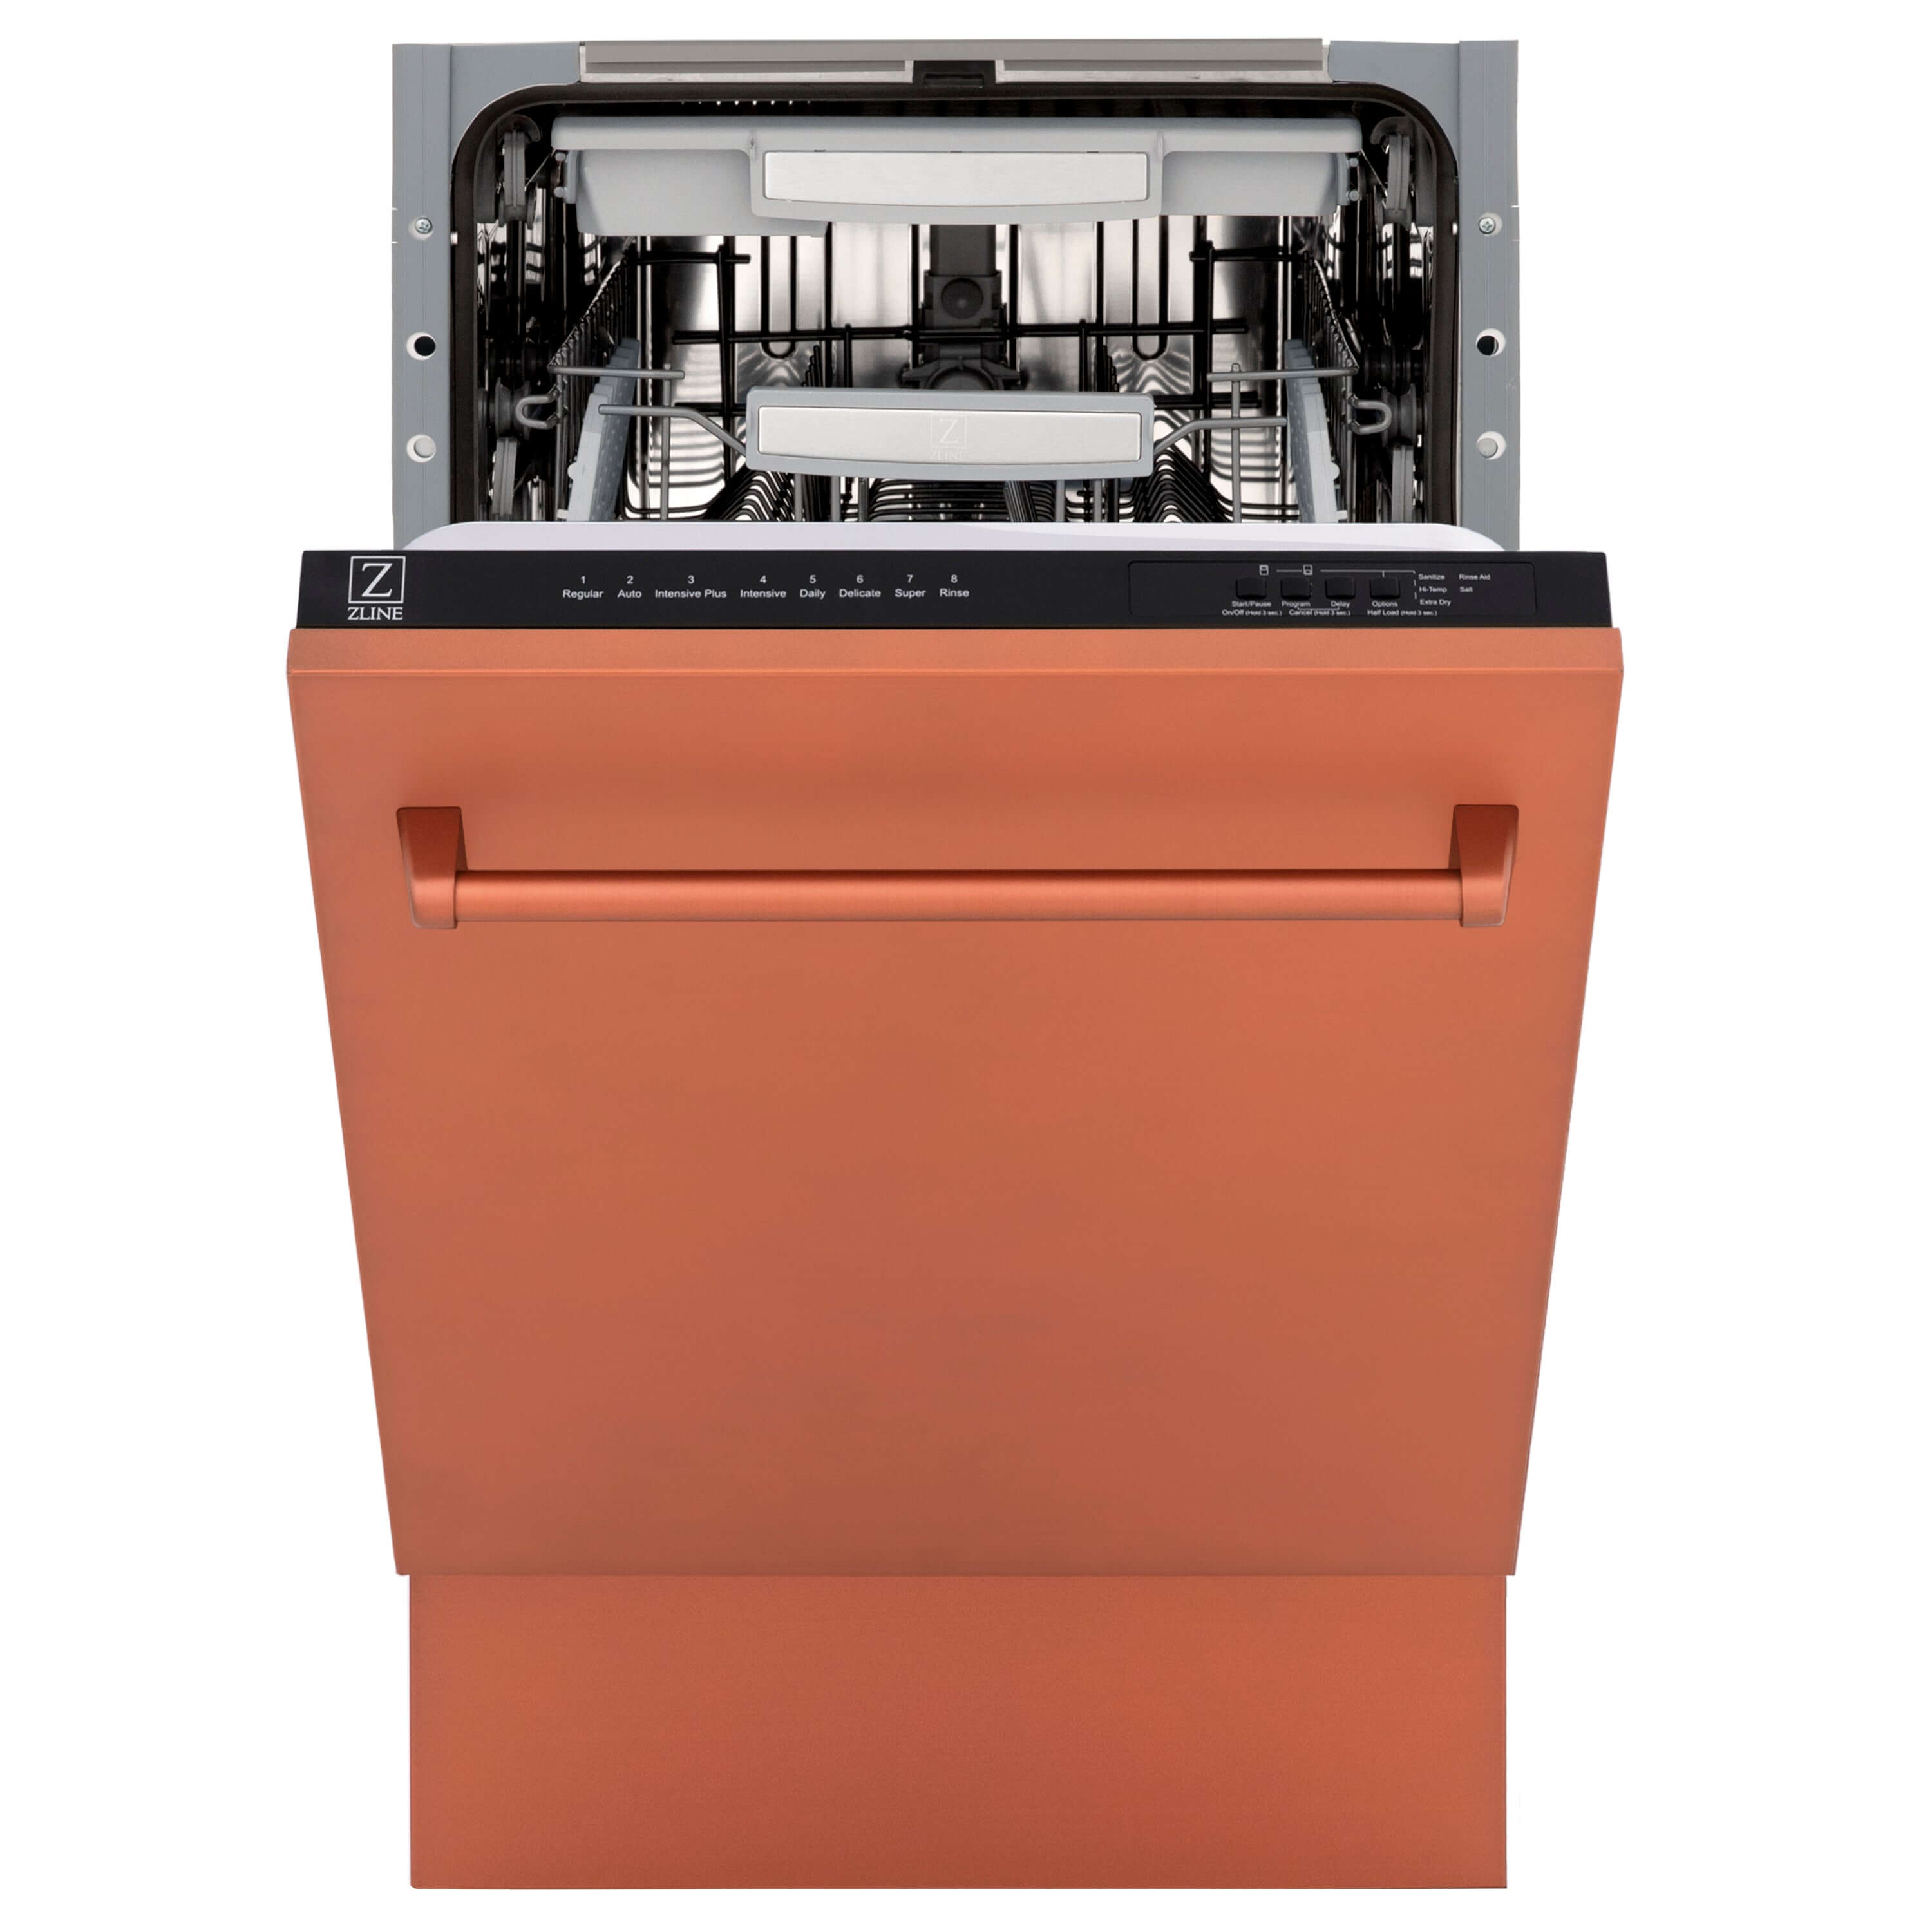 ZLINE 18 in. Tallac Series 3rd Rack Top Control Dishwasher in a Stainless Steel Tub with Copper Panel, 51dBa (DWV-C-18)